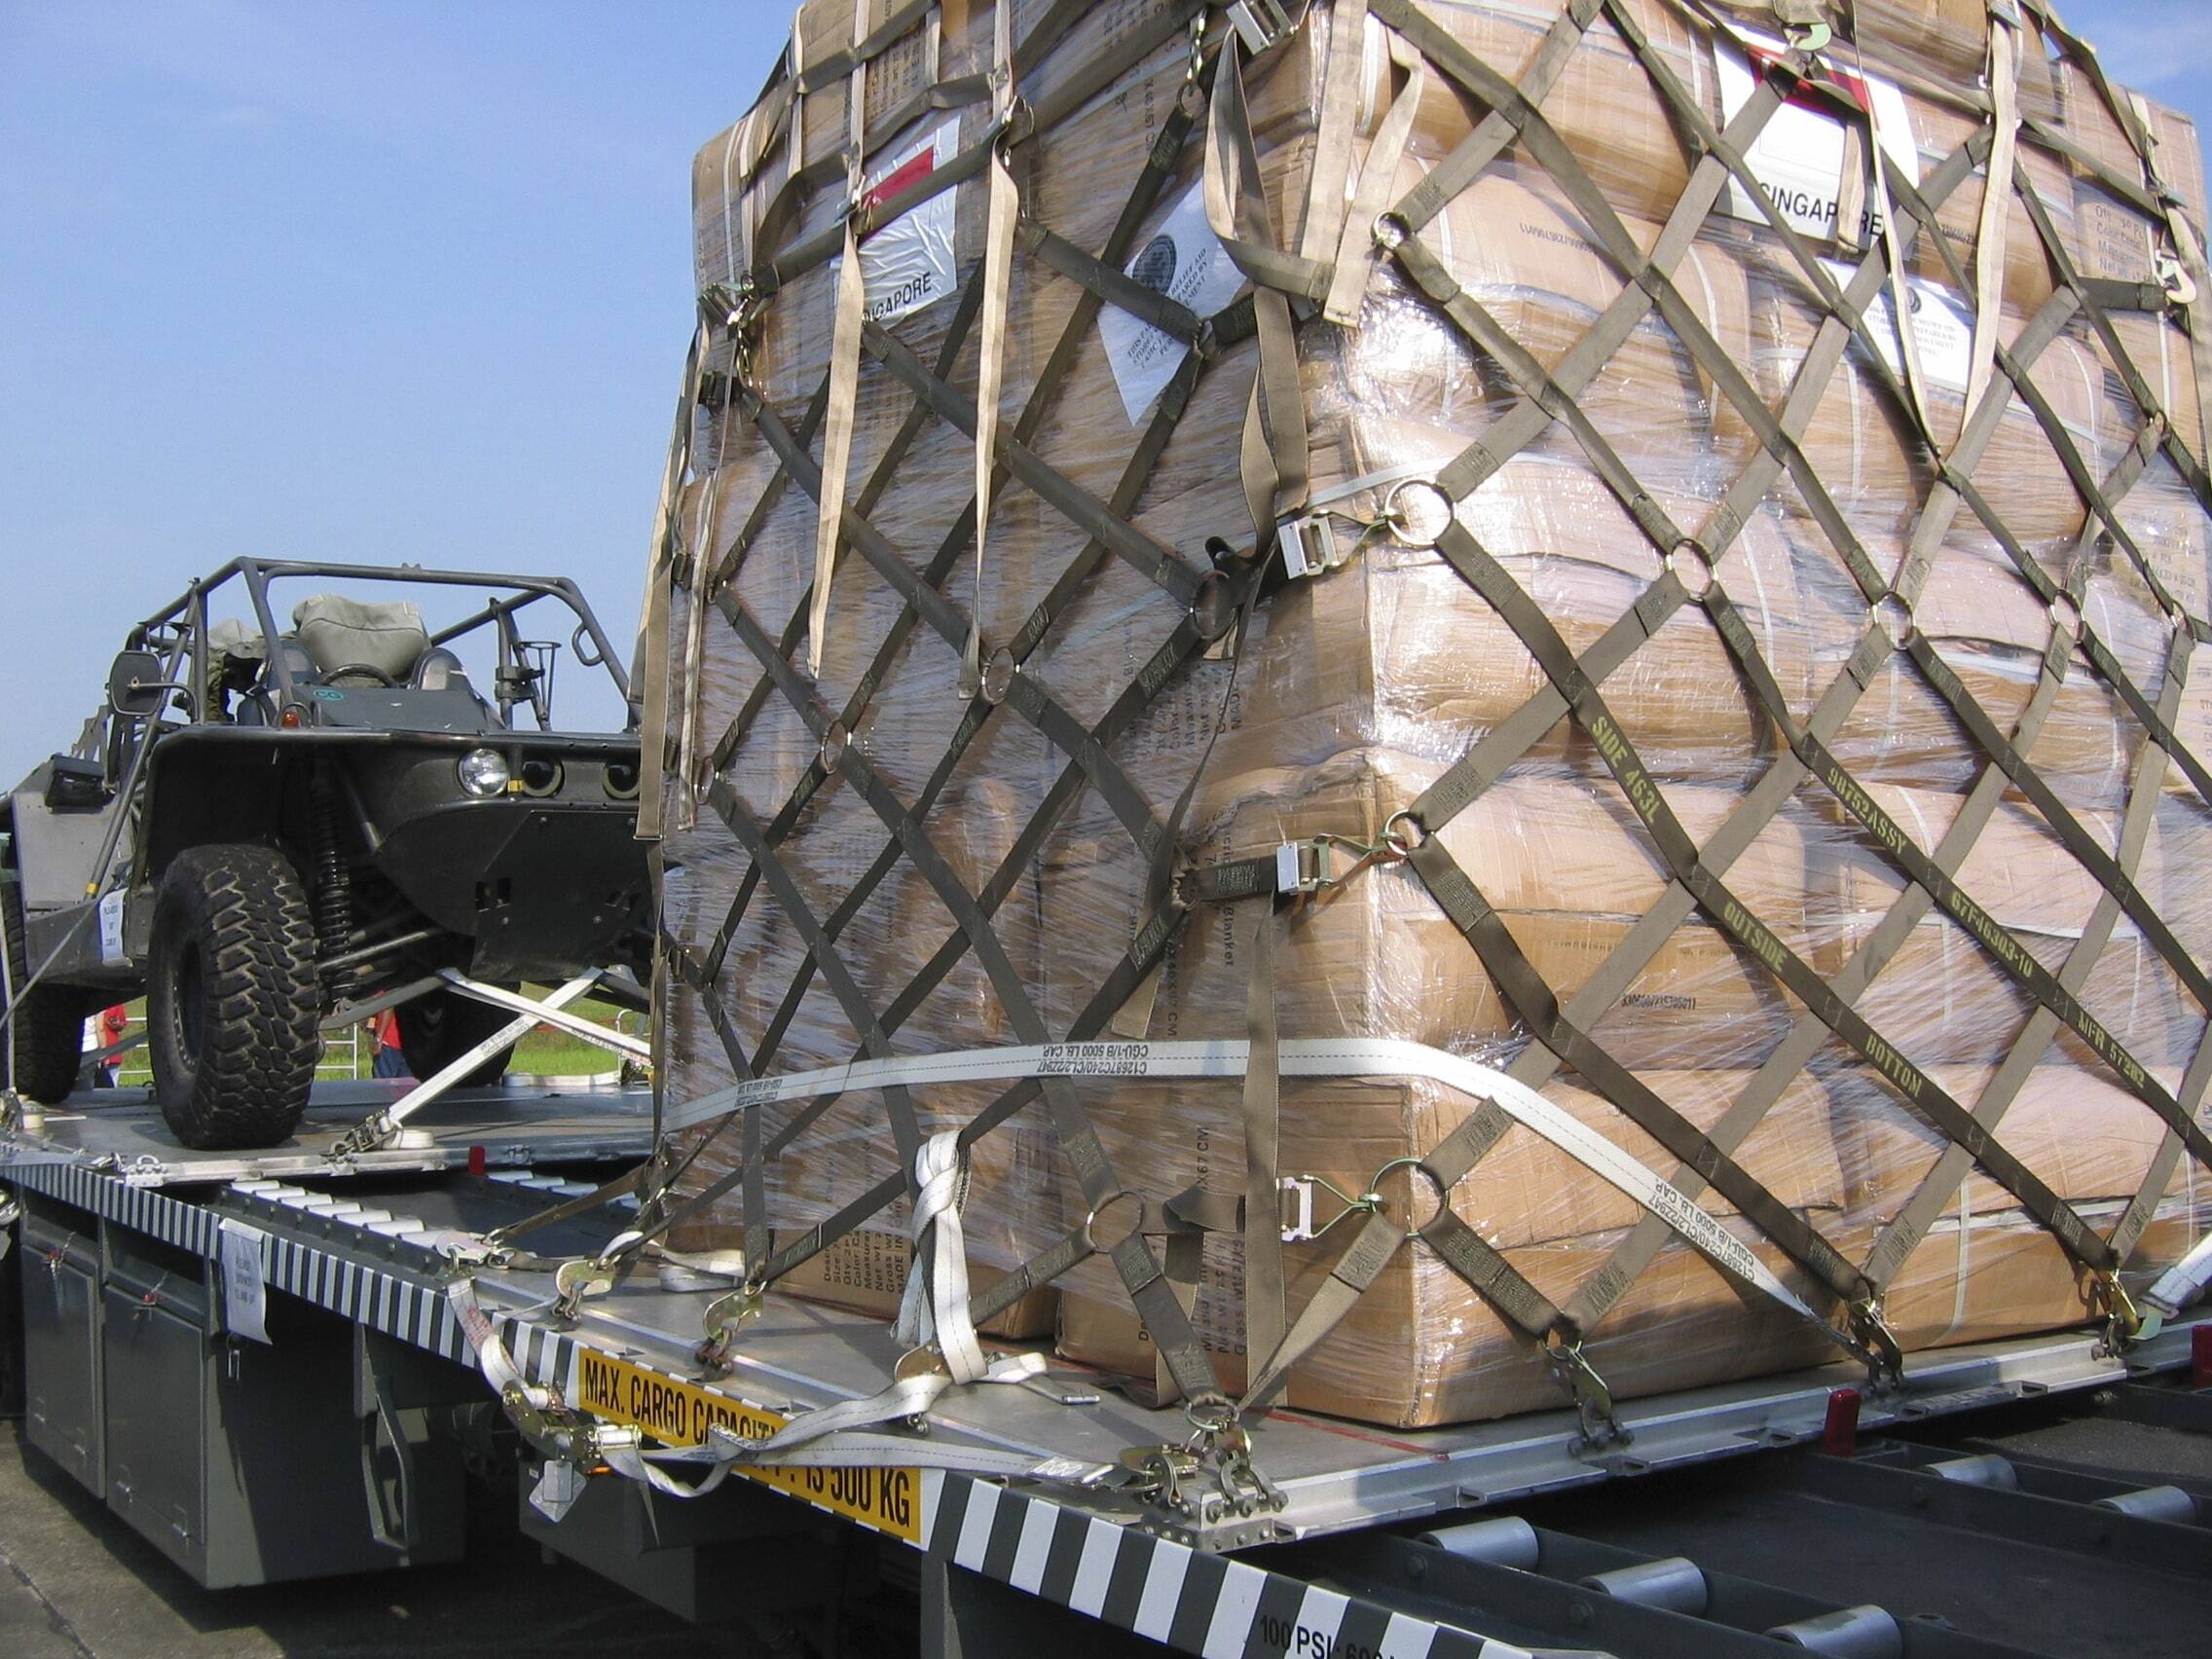 Shipment of Military Freight